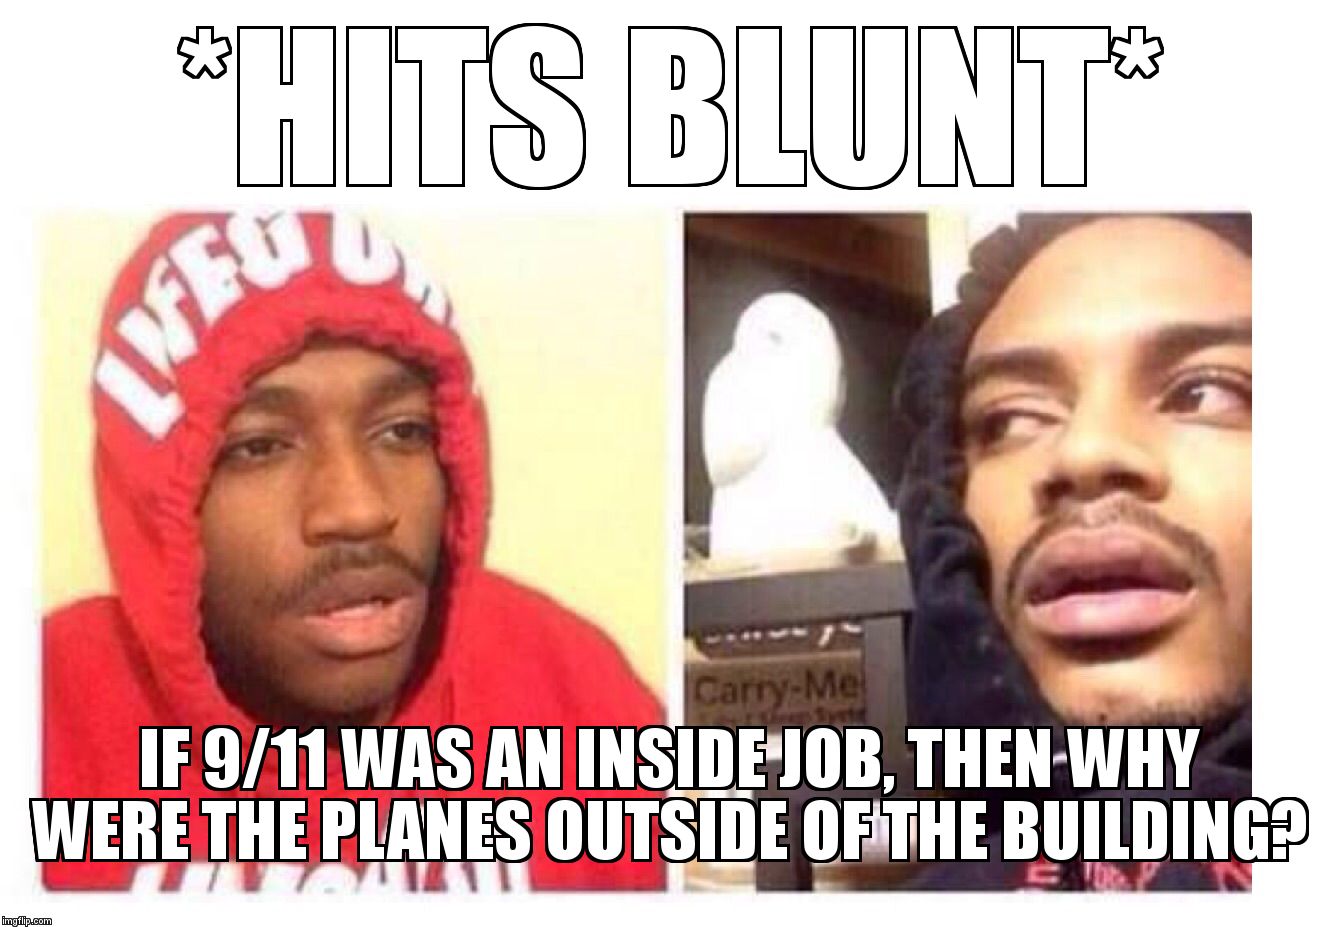 Hits blunt | *HITS BLUNT*; IF 9/11 WAS AN INSIDE JOB, THEN WHY WERE THE PLANES OUTSIDE OF THE BUILDING? | image tagged in hits blunt | made w/ Imgflip meme maker